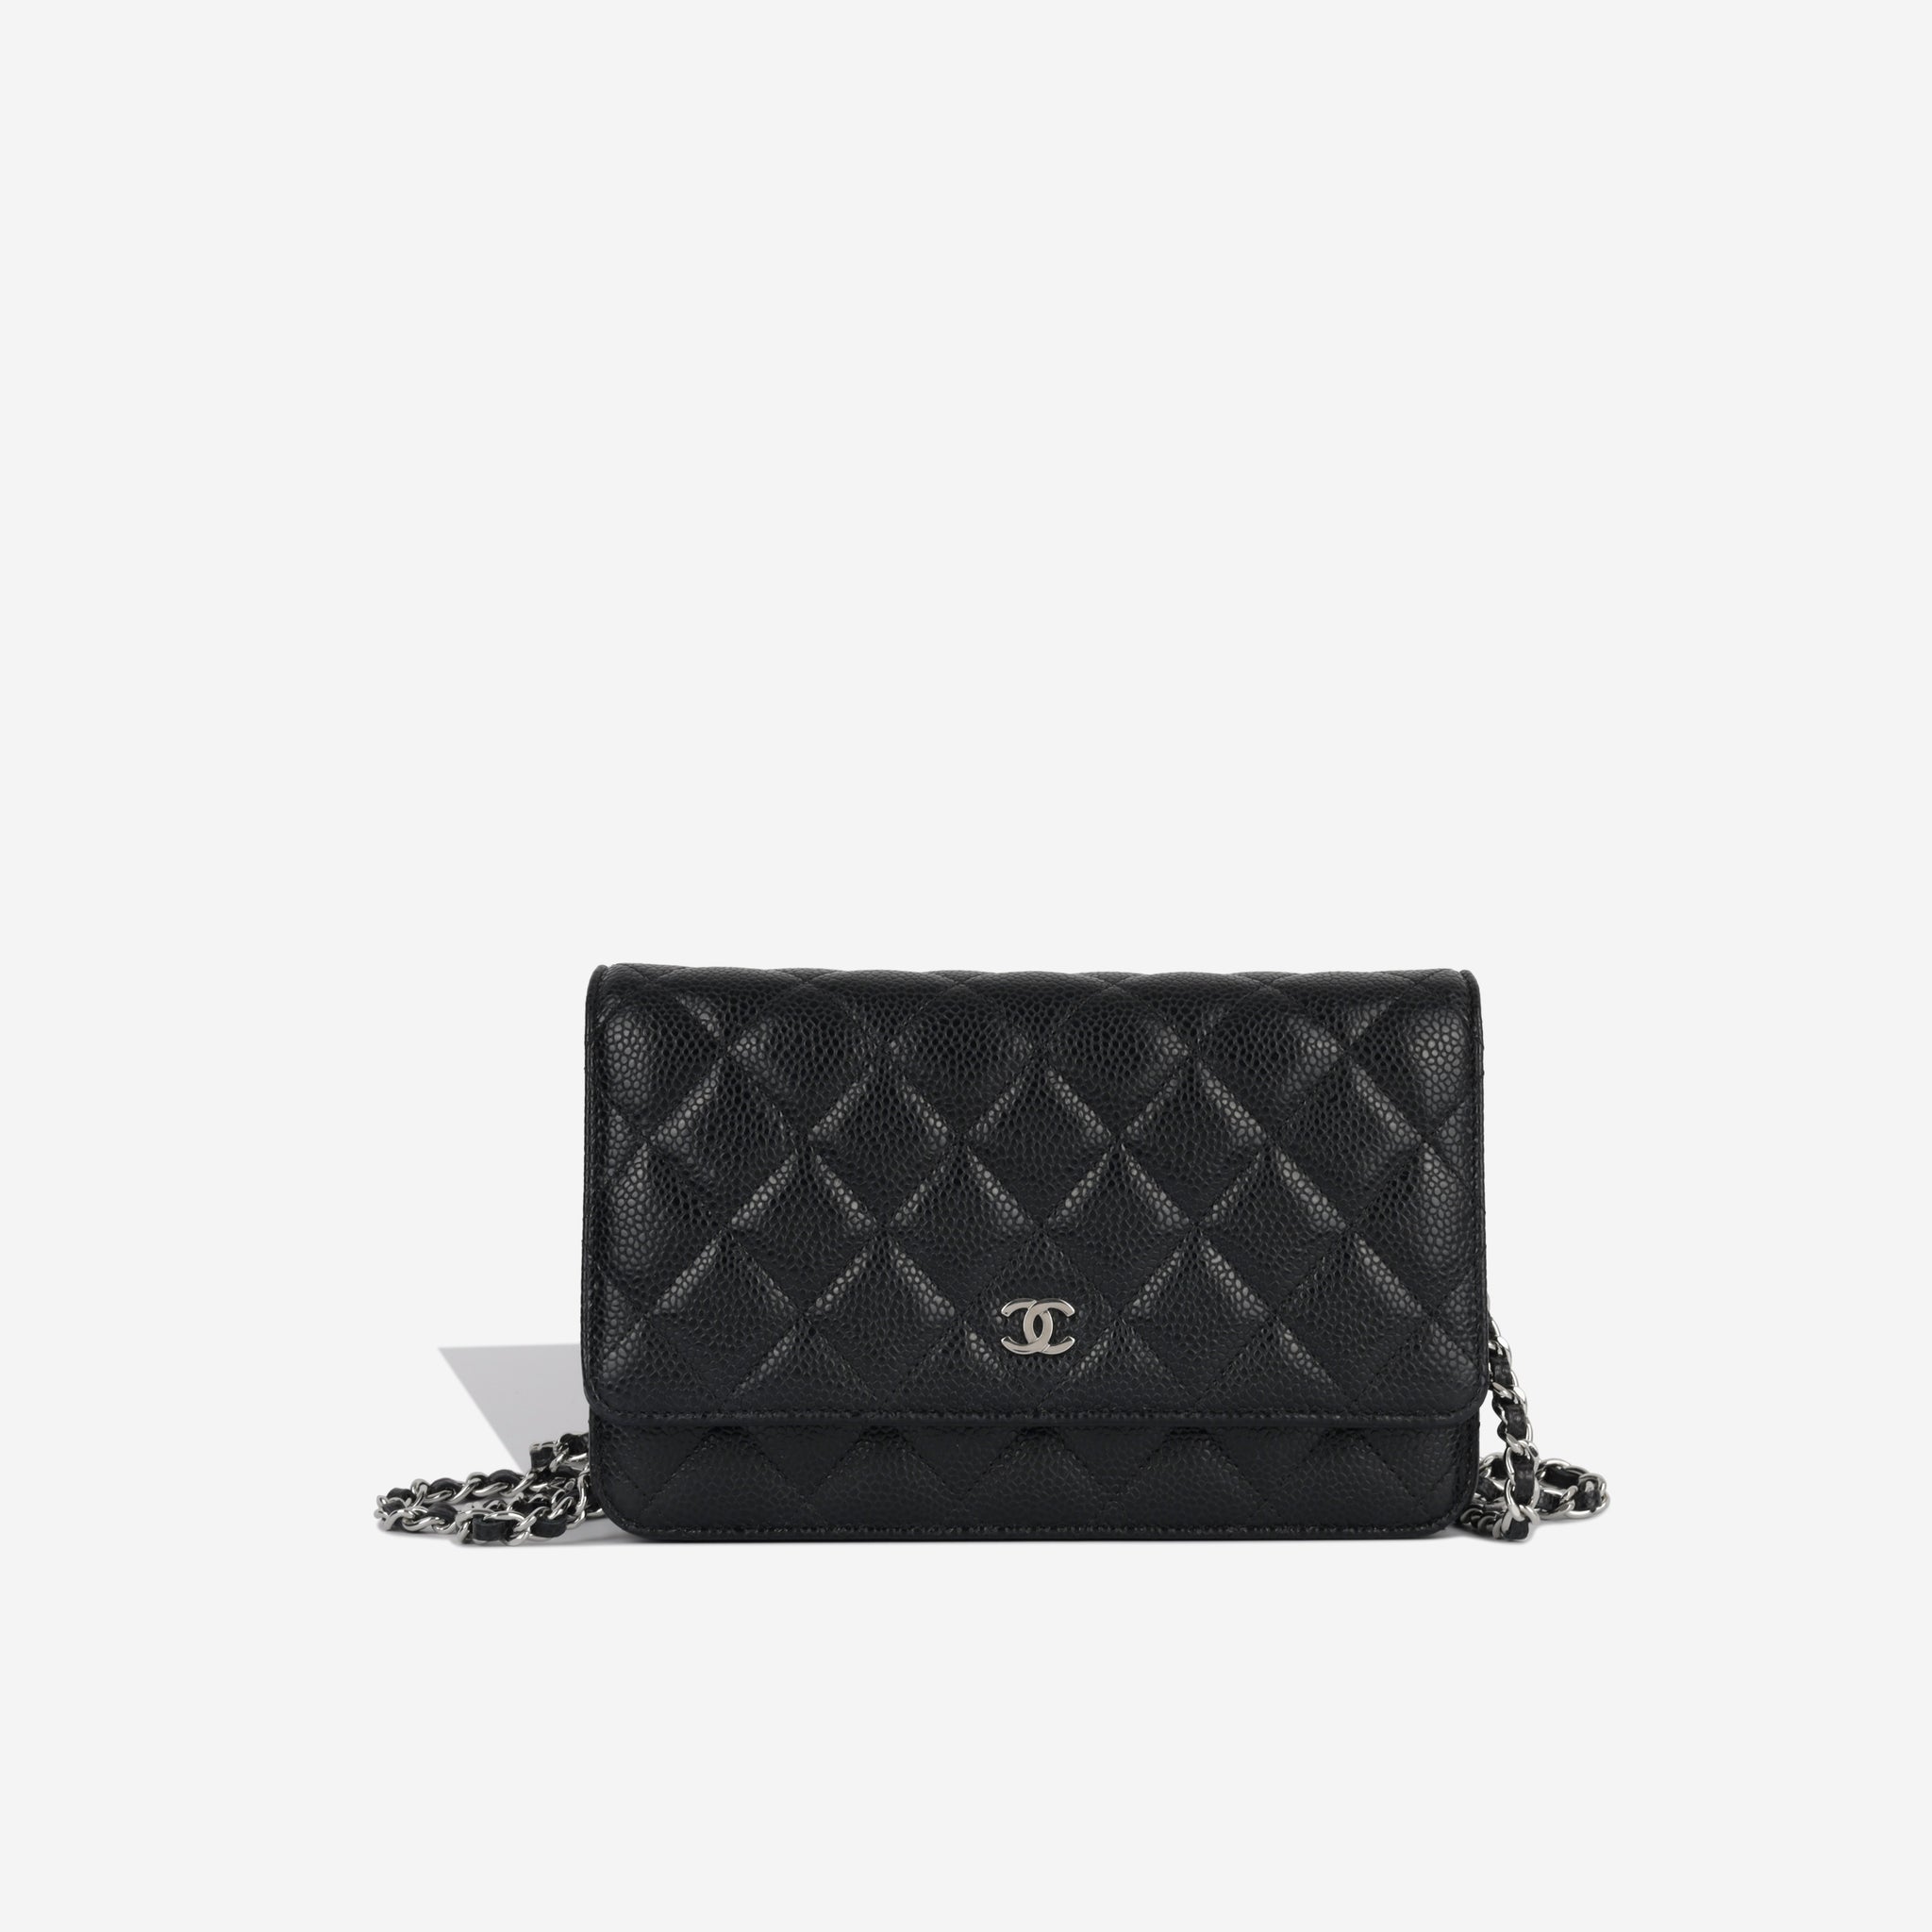 Chanel - Classic Wallet On Chain - Black Caviar - SHW - Immaculate ...